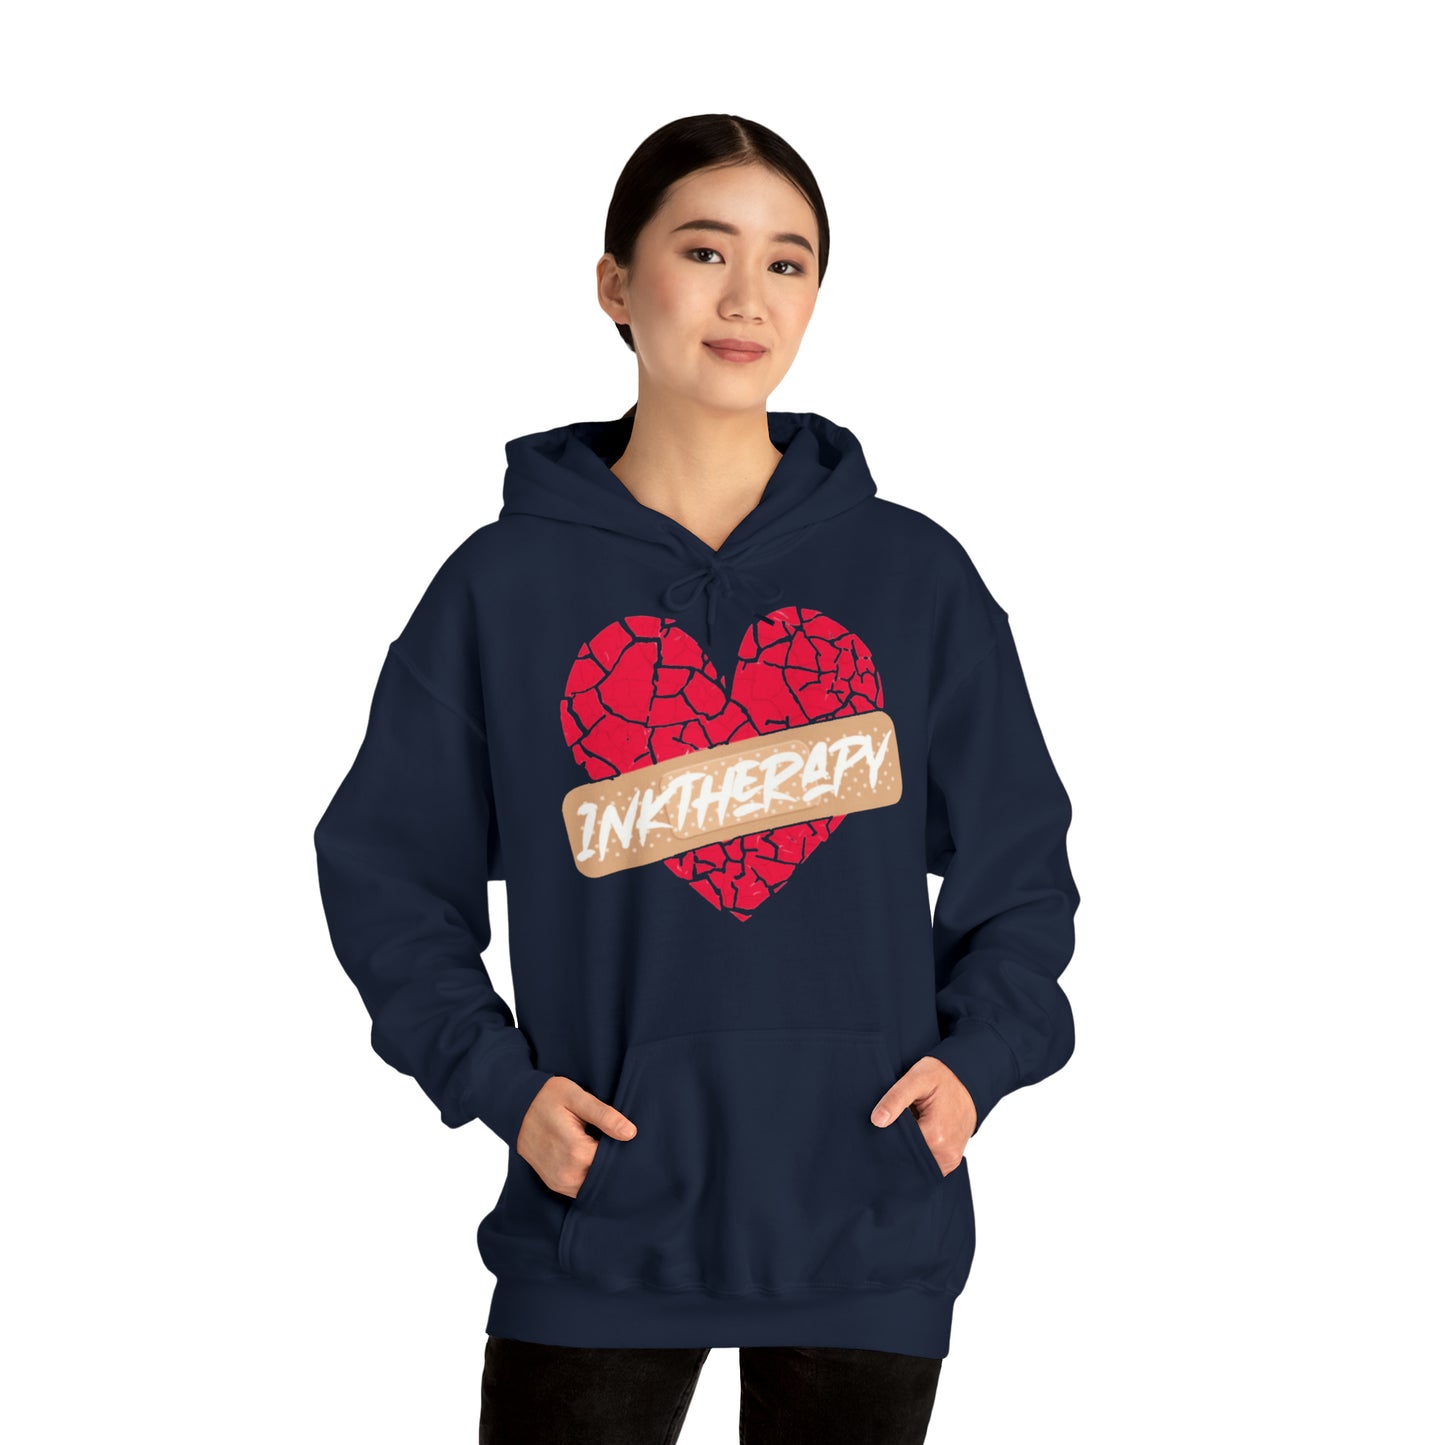 InkTherapy Band Aid Unisex Heavy Blend Hoodie